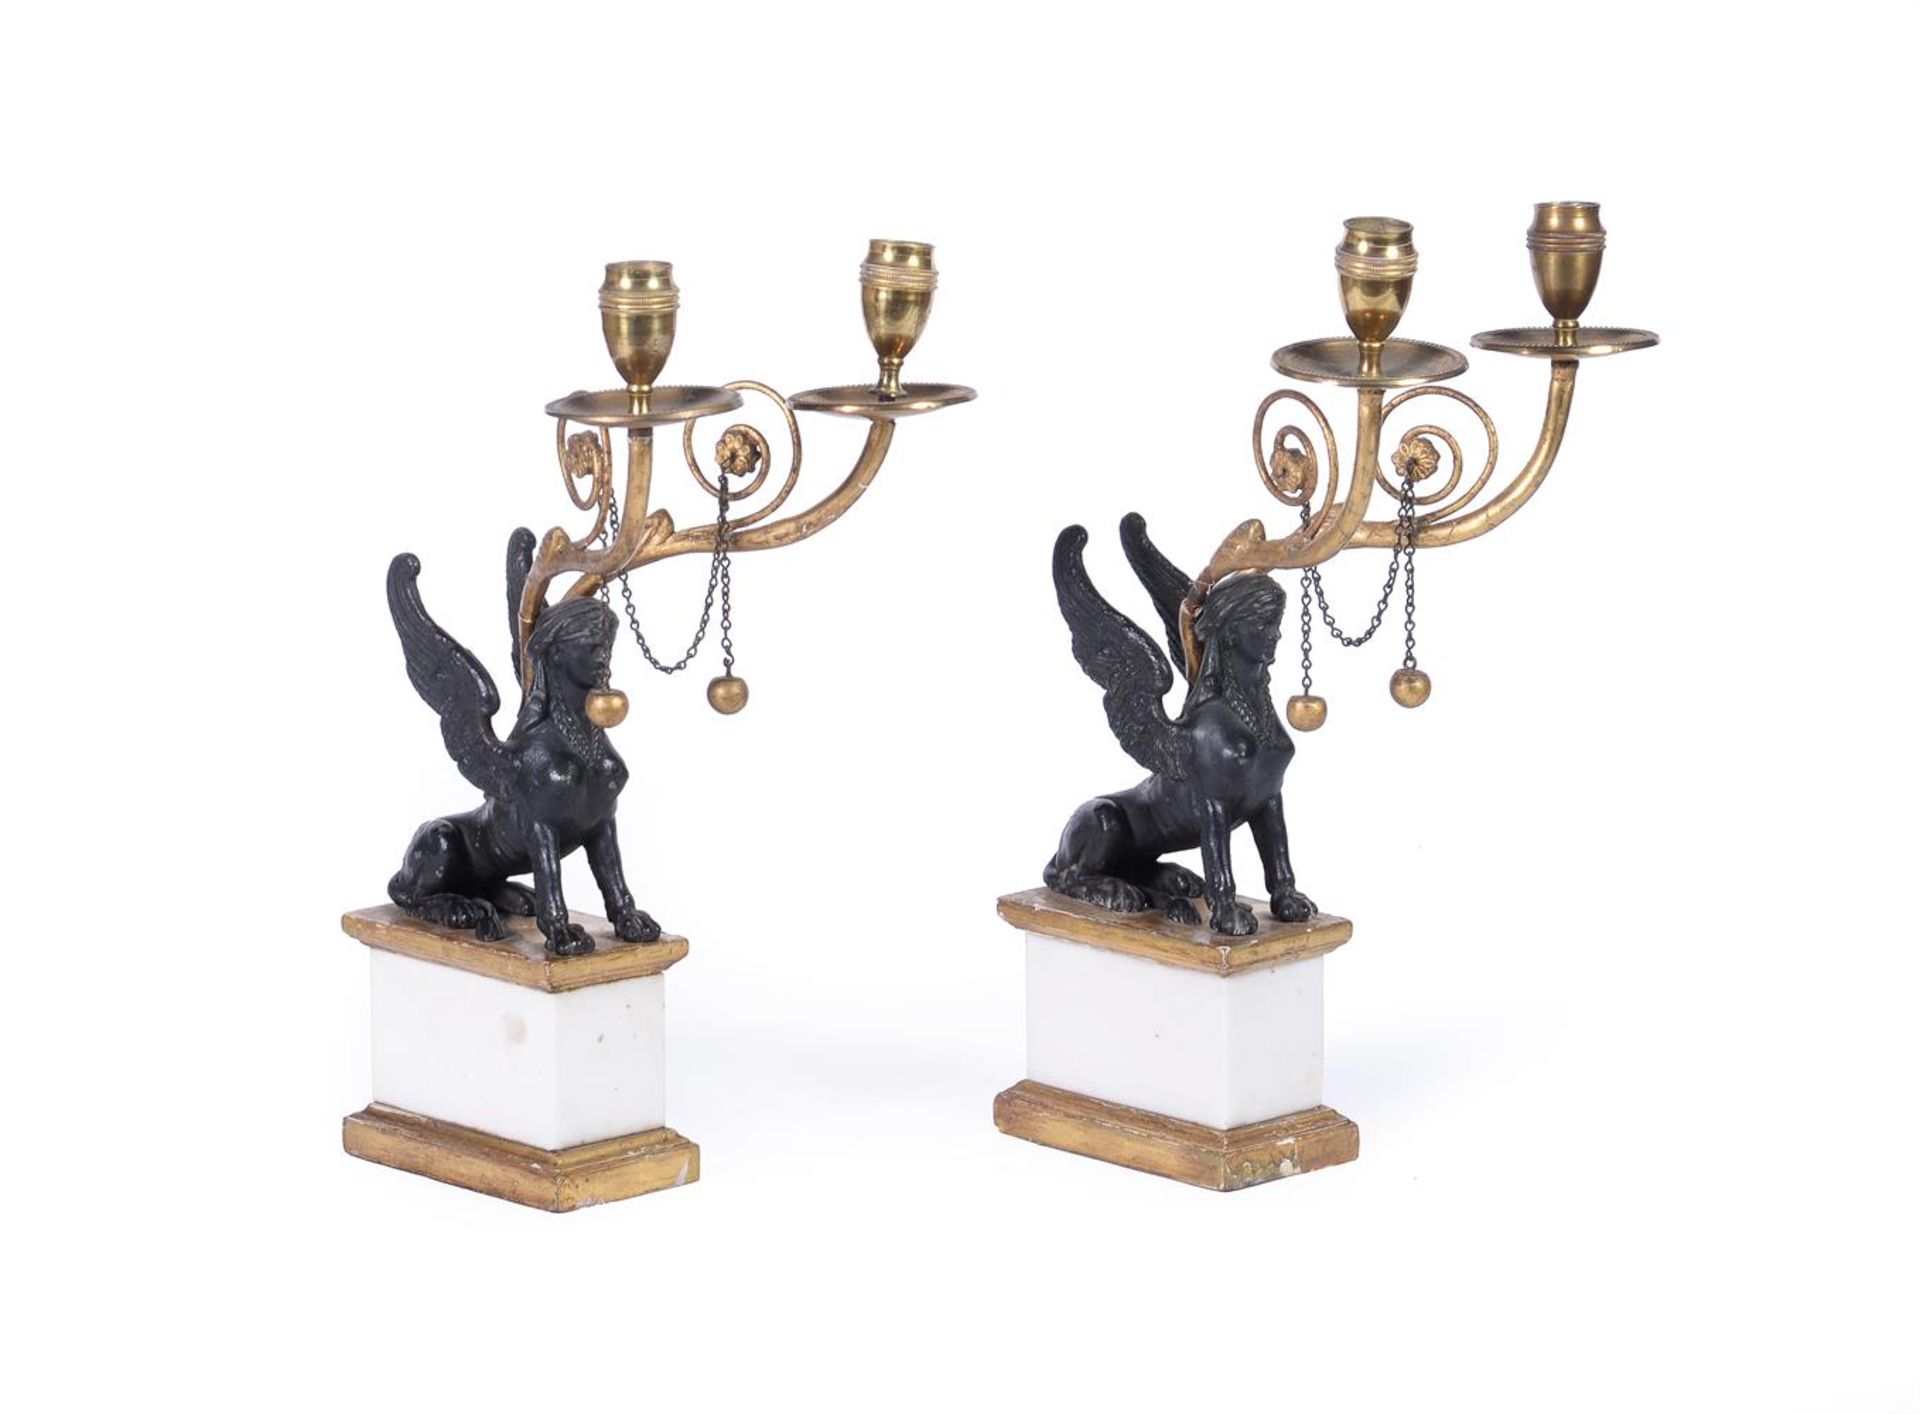 A PAIR OF REGENCY STYLE BLACK SPELTER AND MARBLE CANDELABRA, LATE 19TH CENTURY